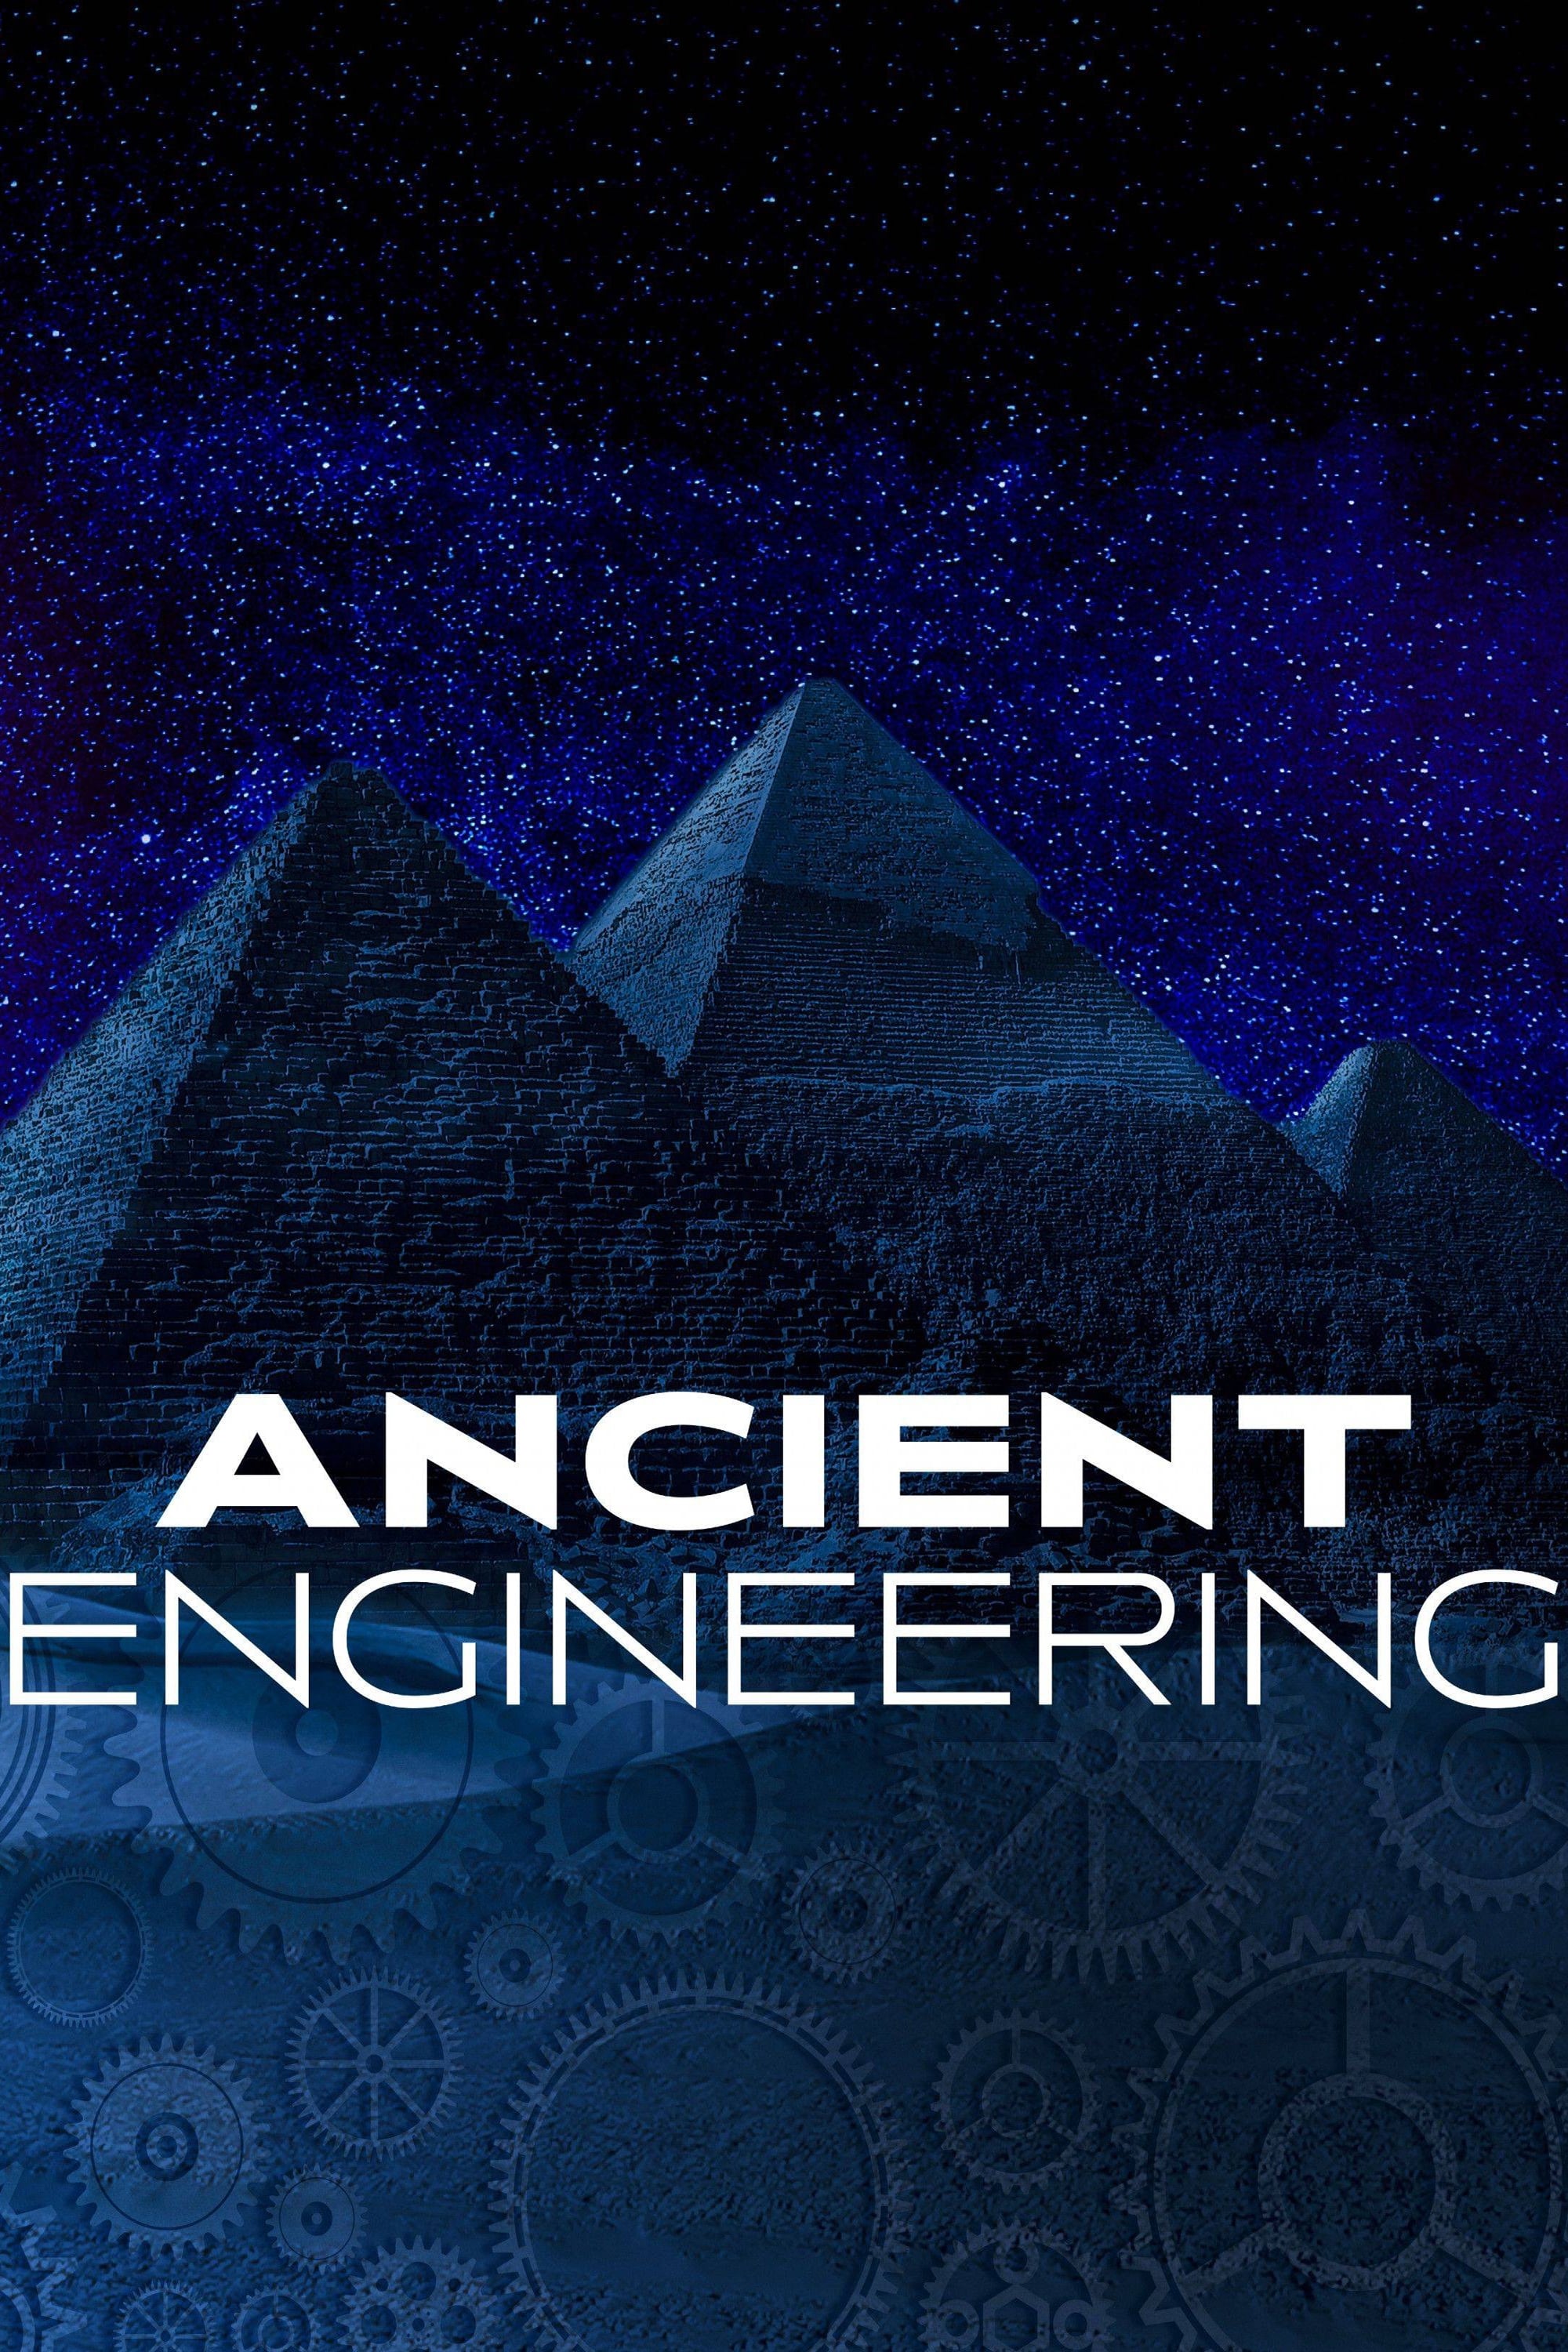 Ancient Engineering TV Shows About Ancient Times